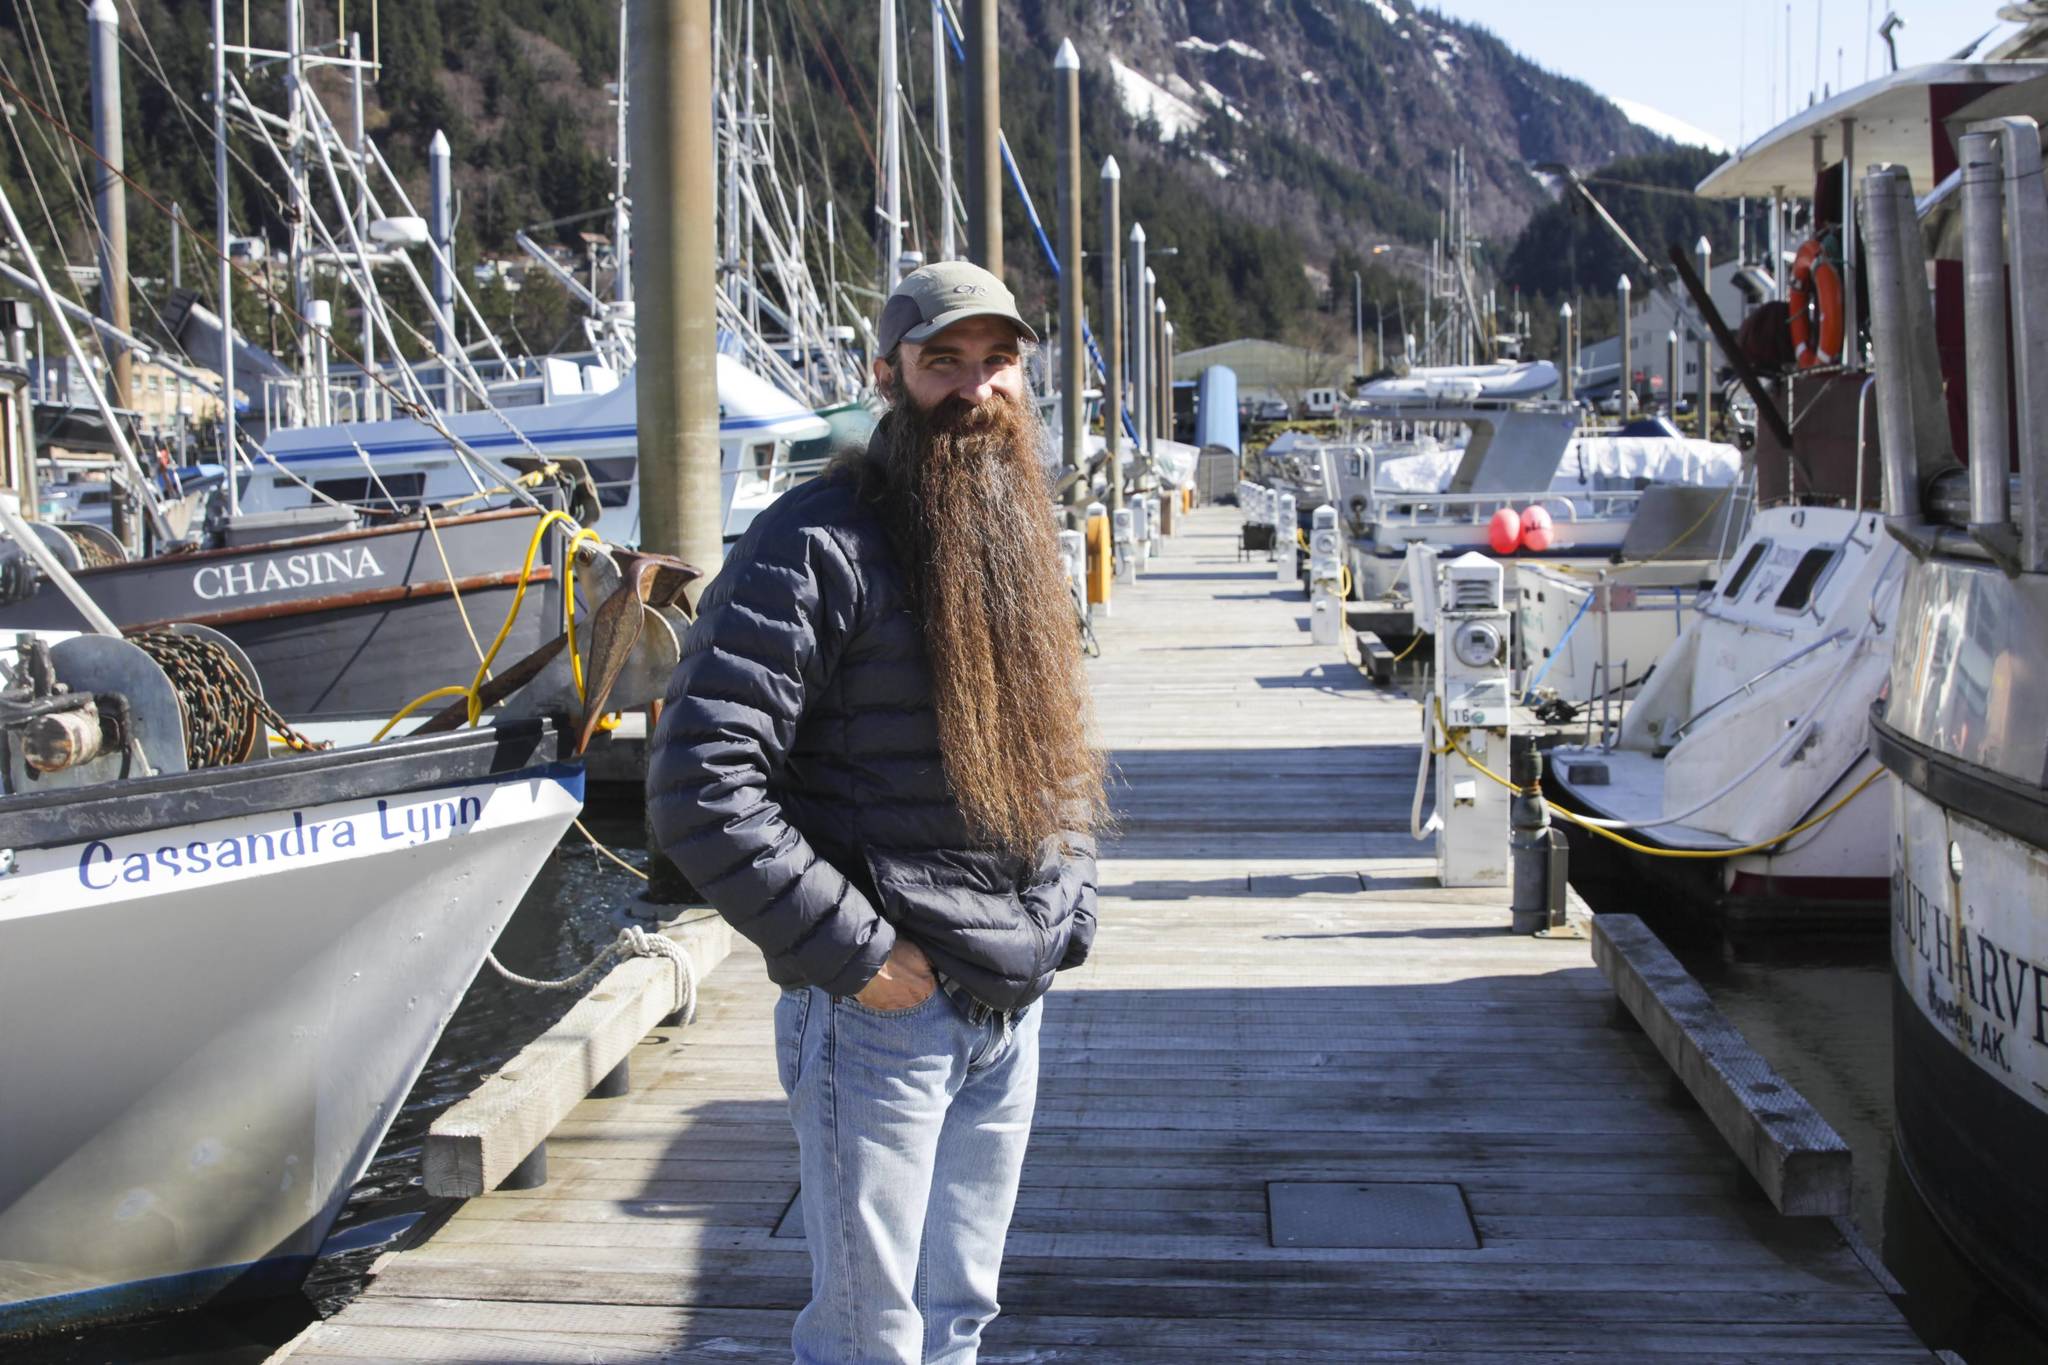 Michael S. Lockett / Juneau Empire 
A proposal to the Docks and Harbors board to double residency fees for live-aboard residents of Juneau’s harbors have rankled many, including Eric Antrim, who lives in Harris Harbor.